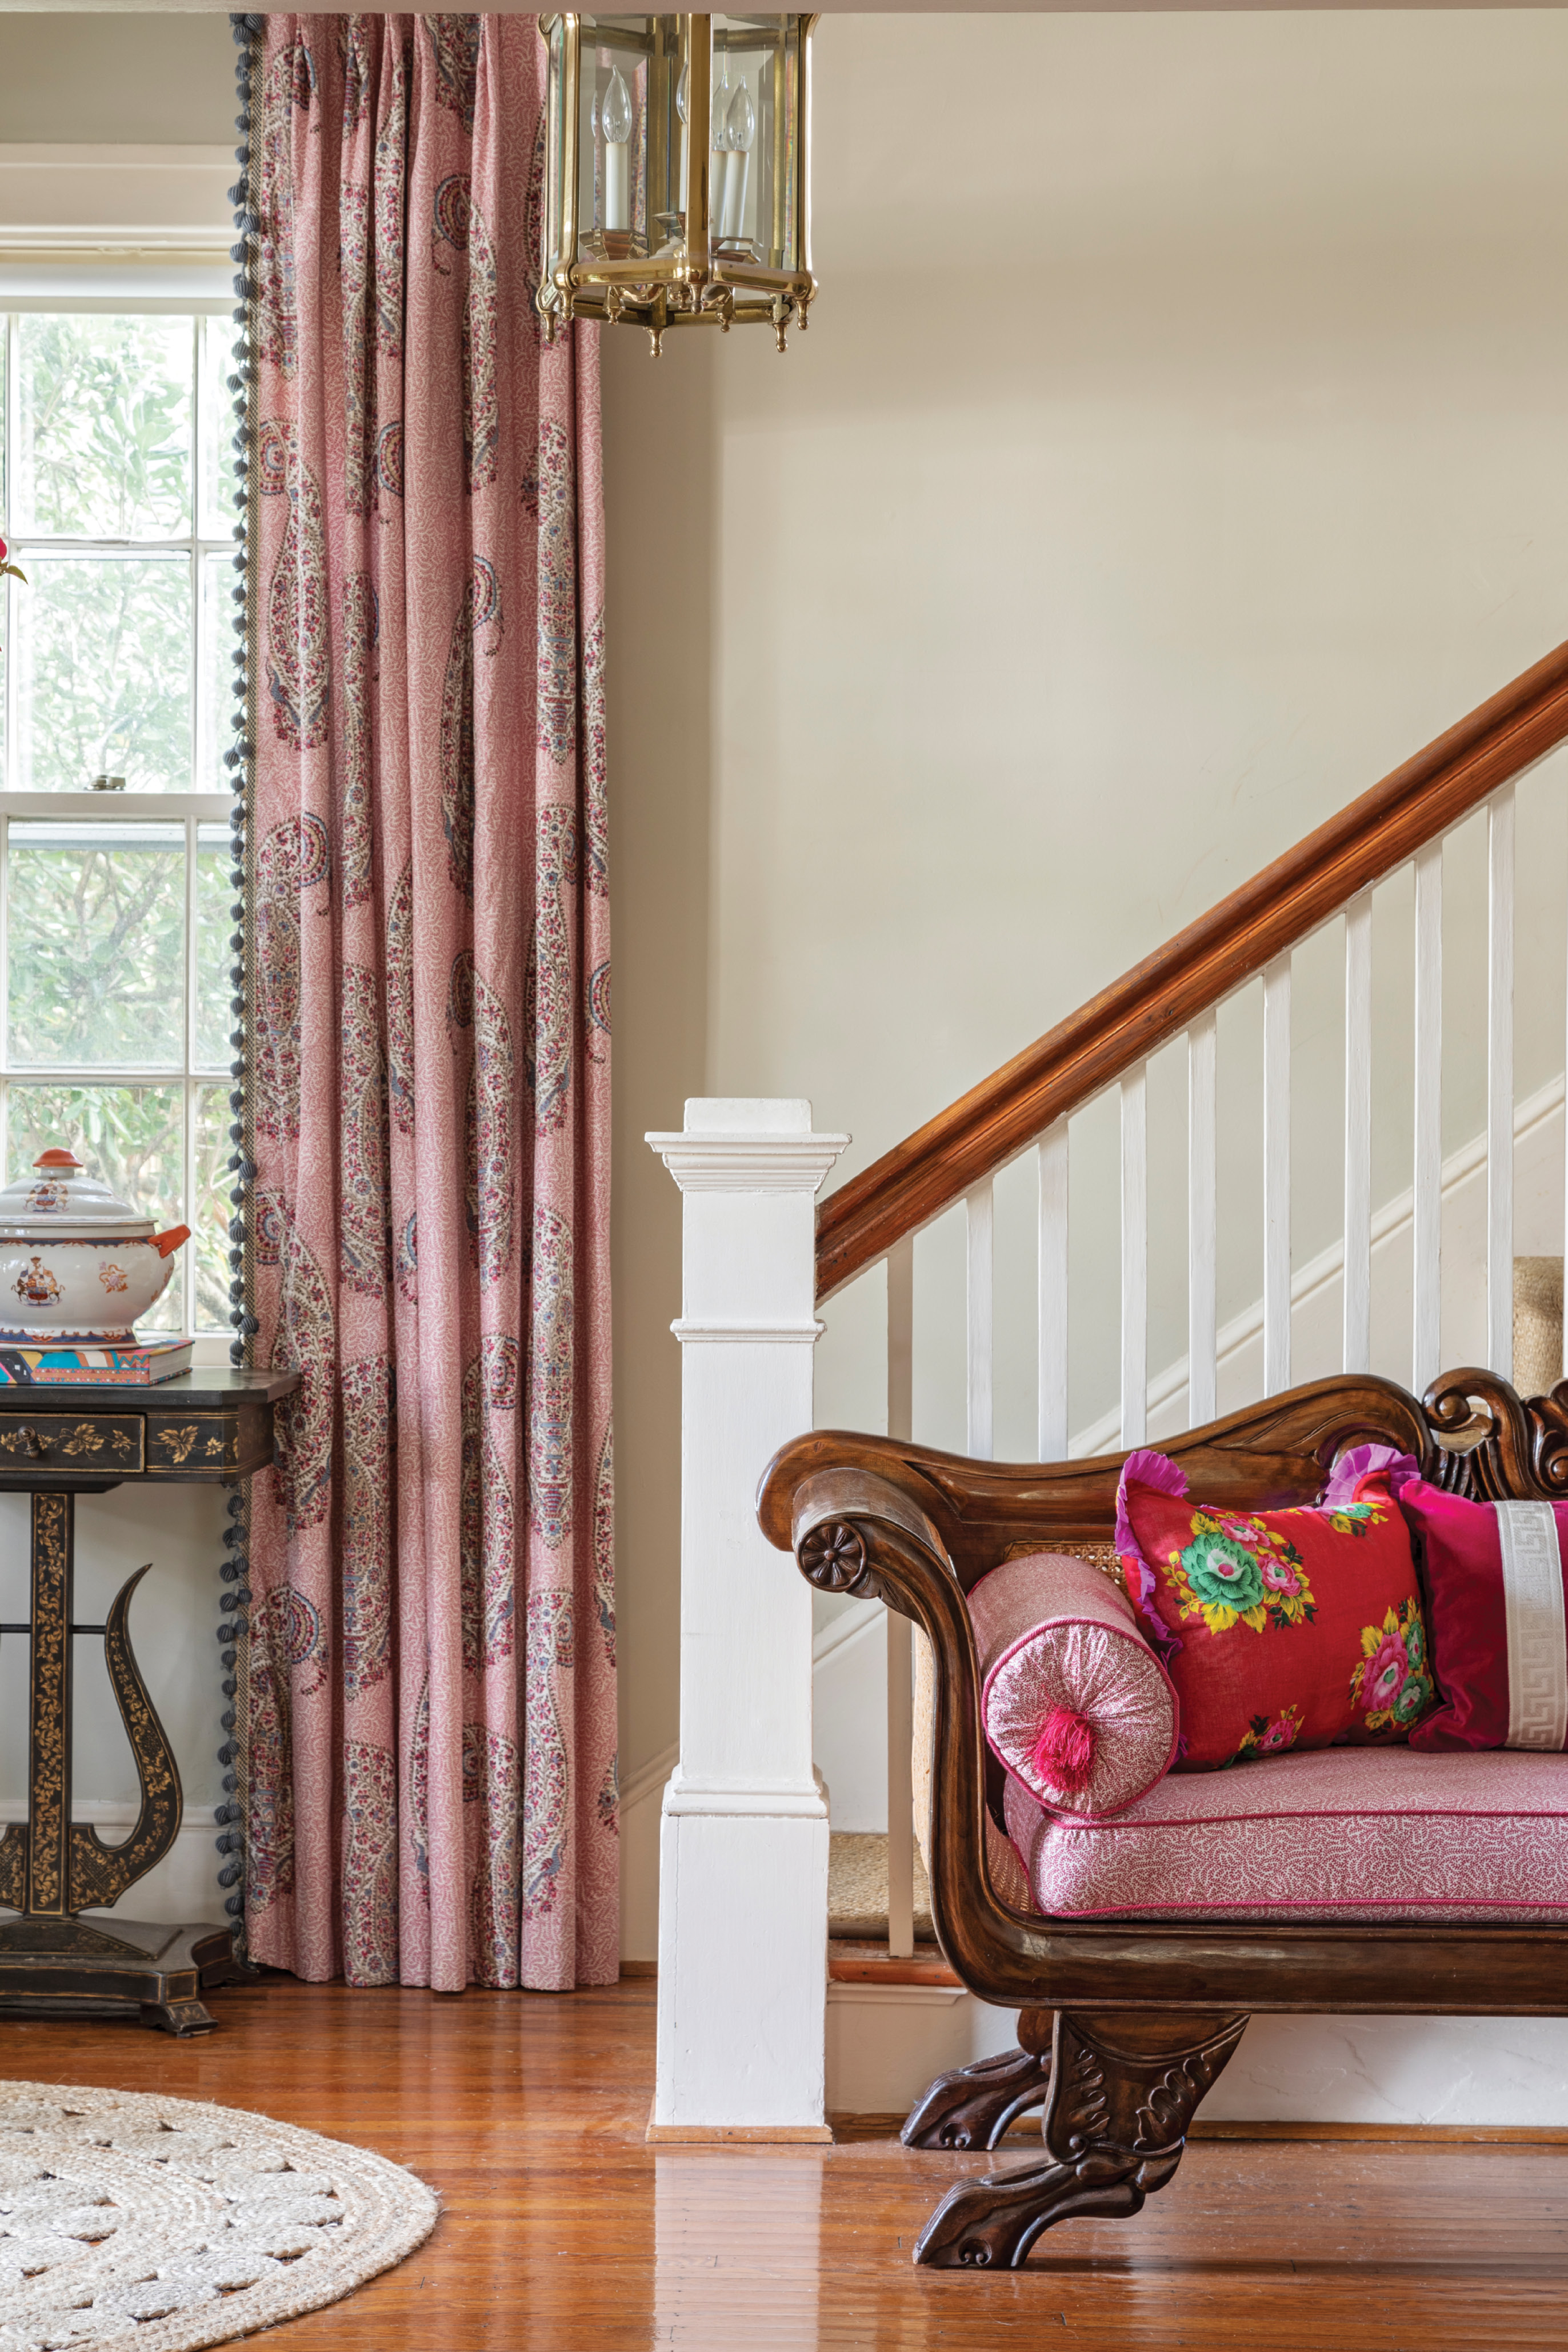 Explore interior designer Alaina Michelle Ralph’s take on this eye-catching new style, mixing antique furnishings and collectibles with modern touches and plenty of bright color, in a 1920s colonial home South of Broad.